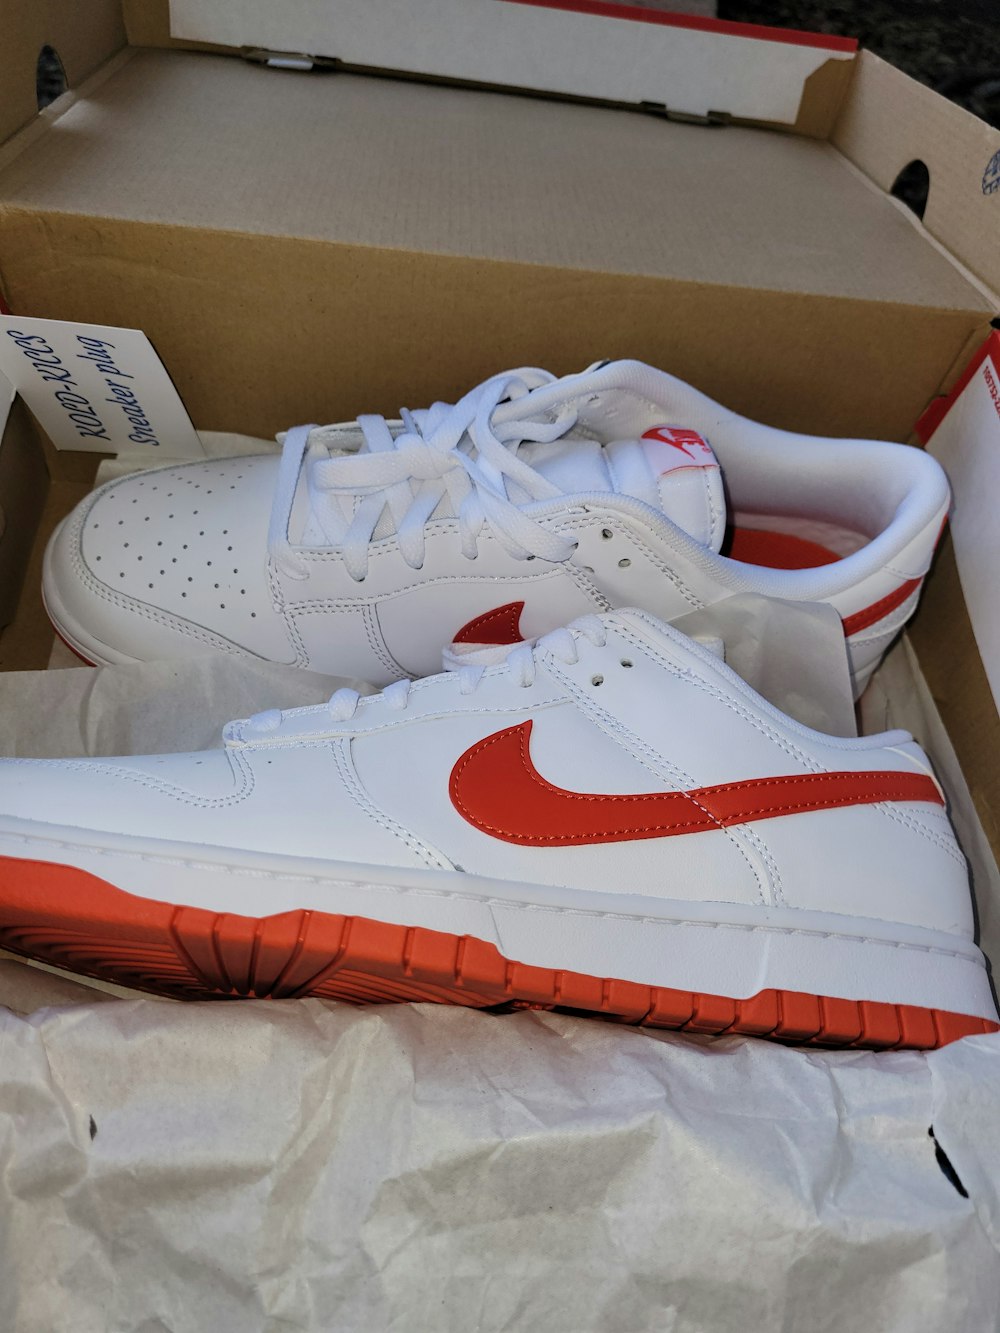 a pair of white and red sneakers in a box